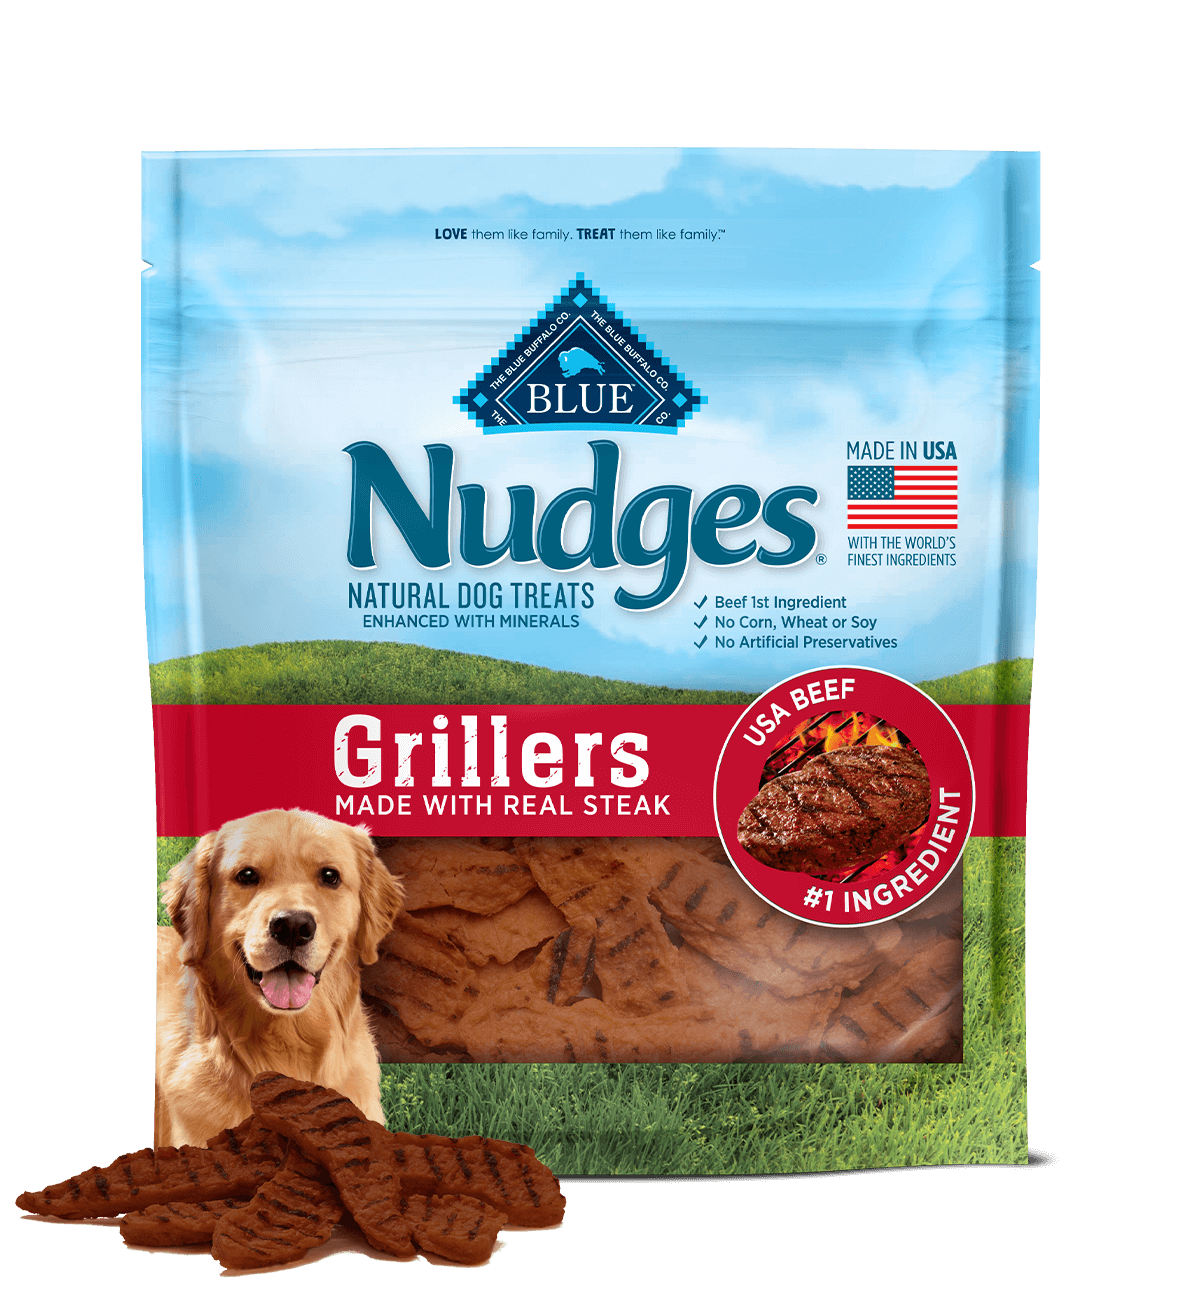 blue nudges ® deliciously charred real steak grillers dog treats